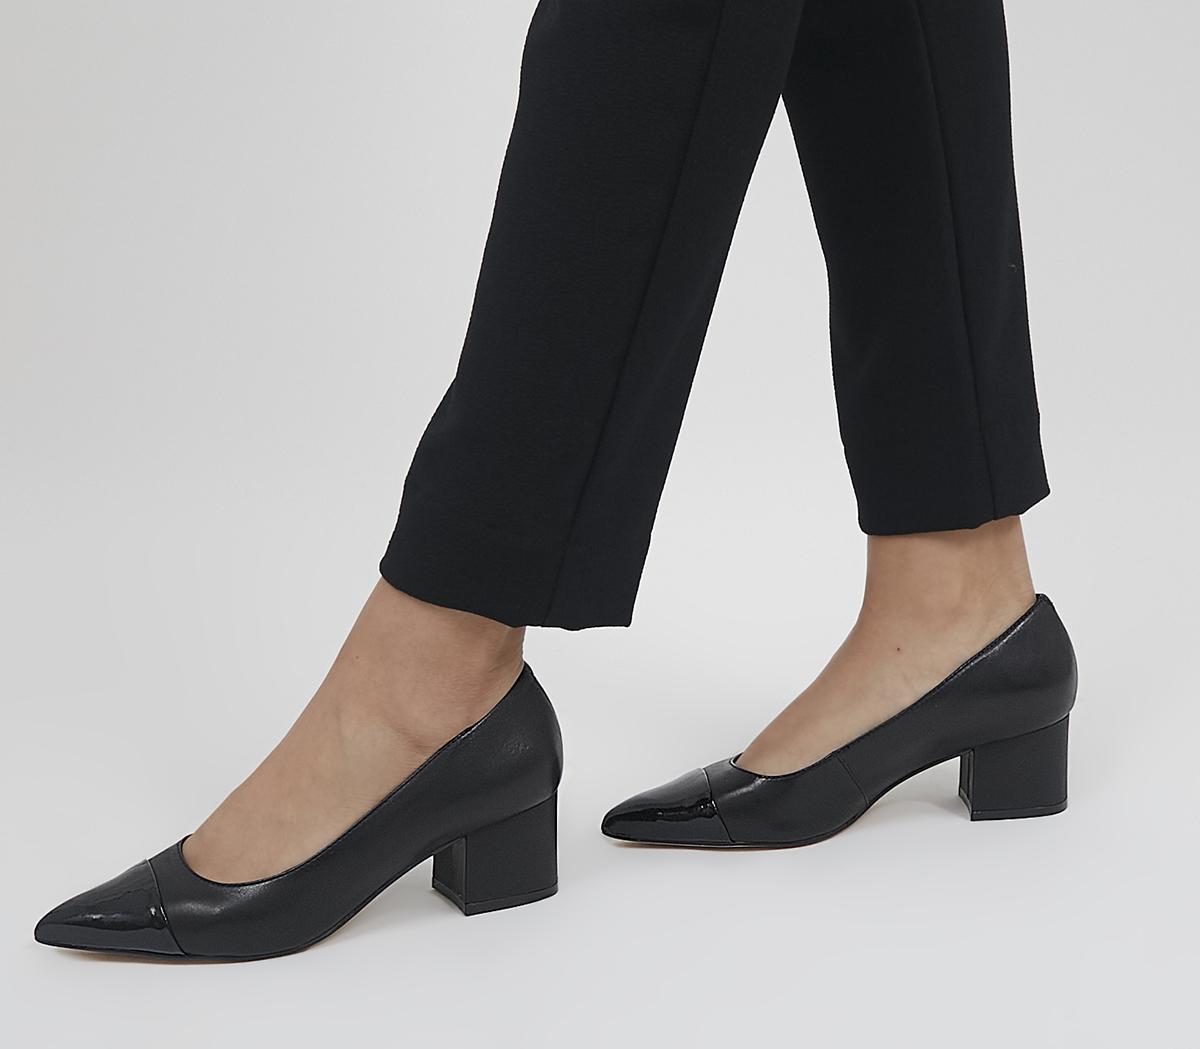 OfficeMindy Toe Cap Low Point HeelsBlack Leather With Patent Toe Cap